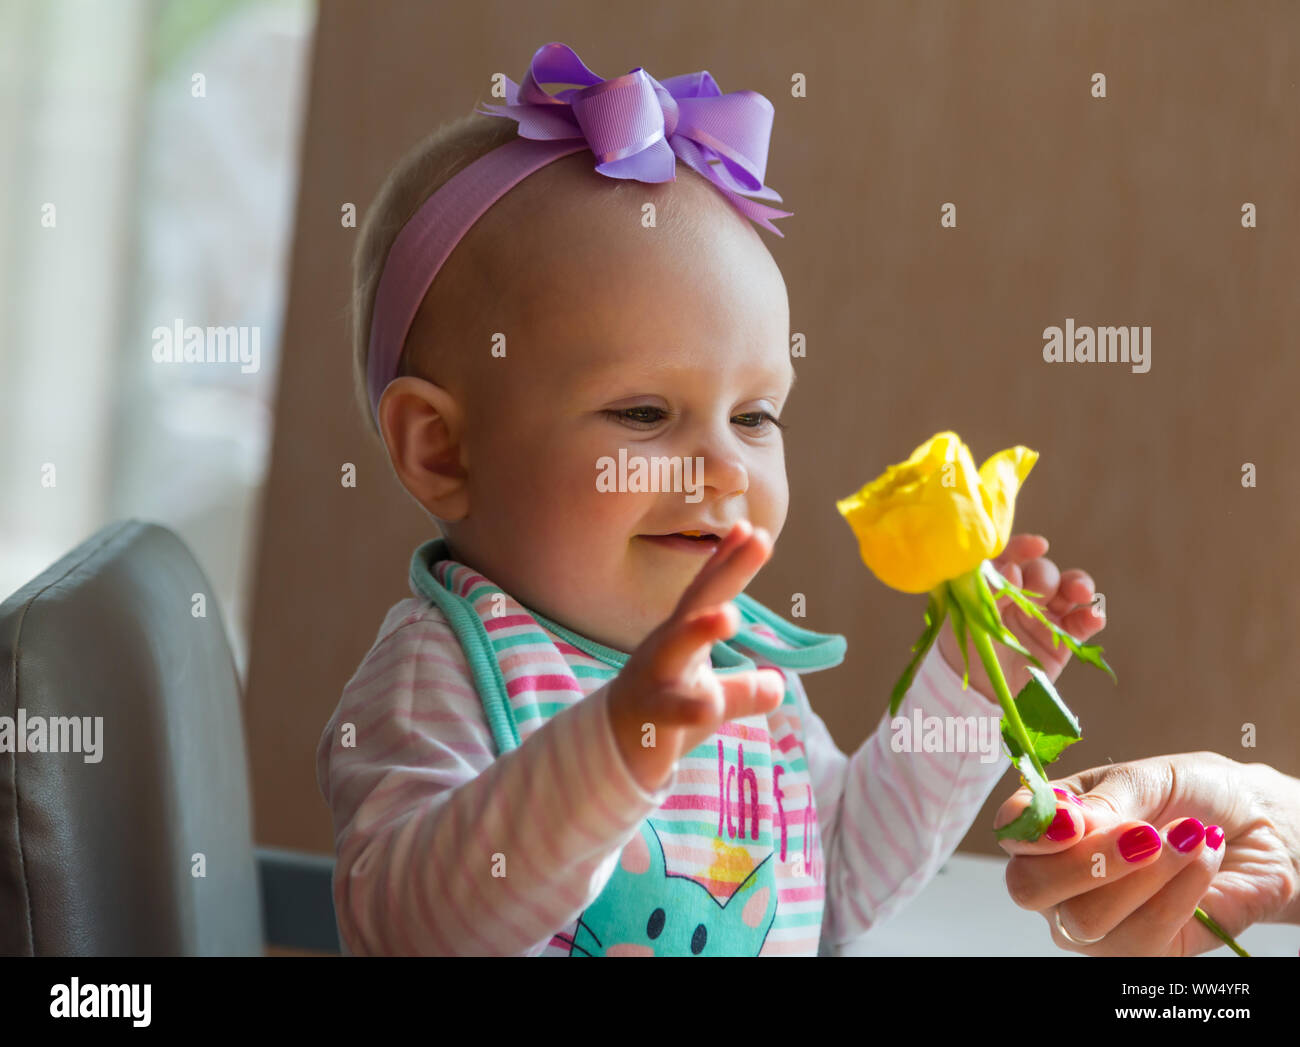 Baby girl with a flower smiling Stock Photo